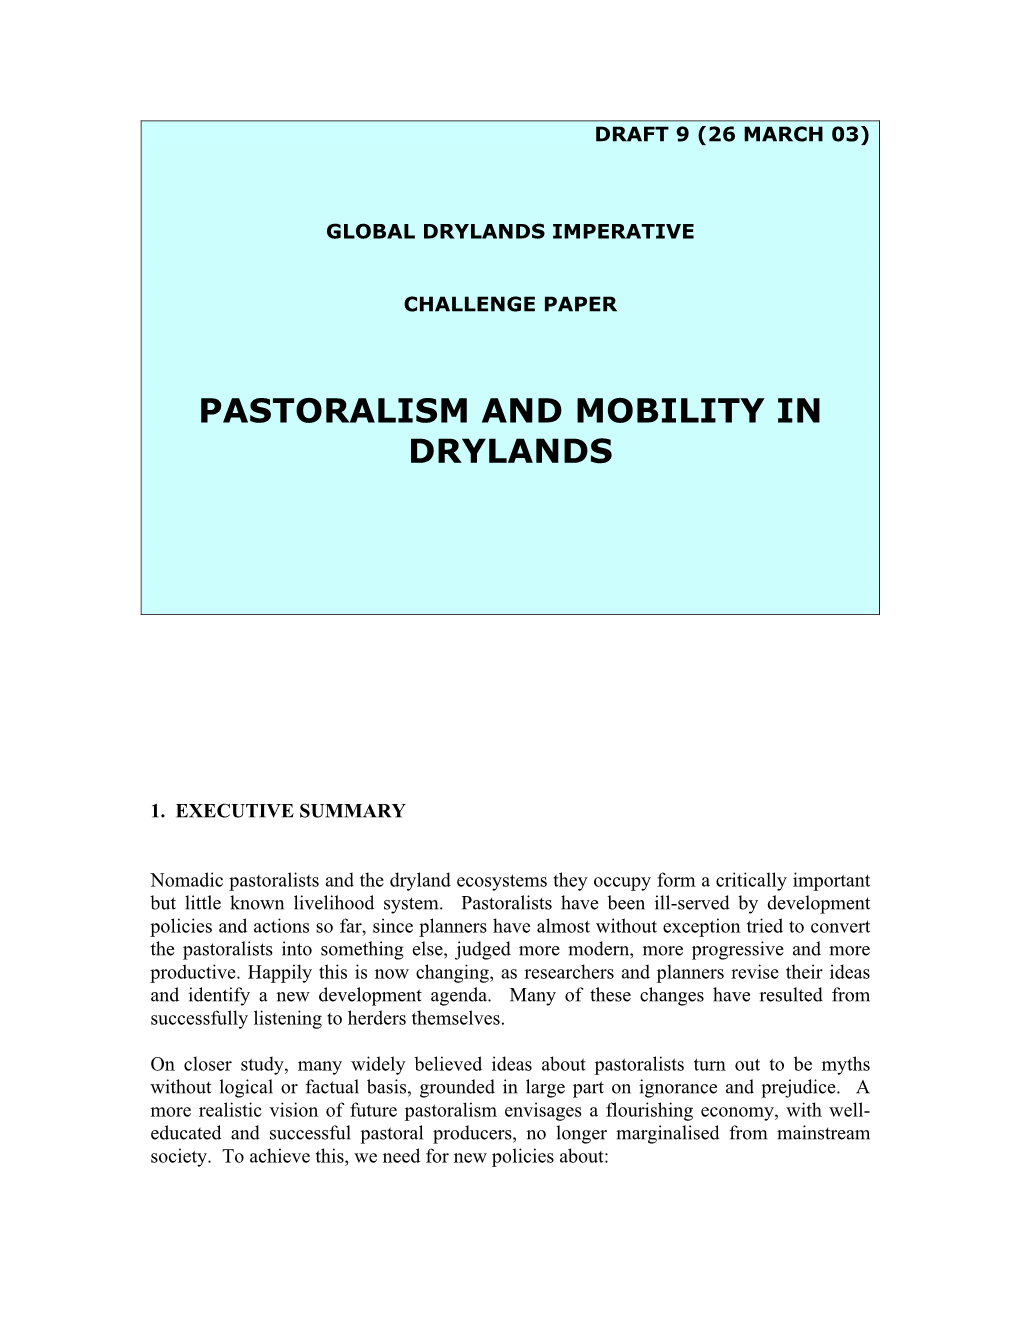 Pastoralism and Mobility in Drylands